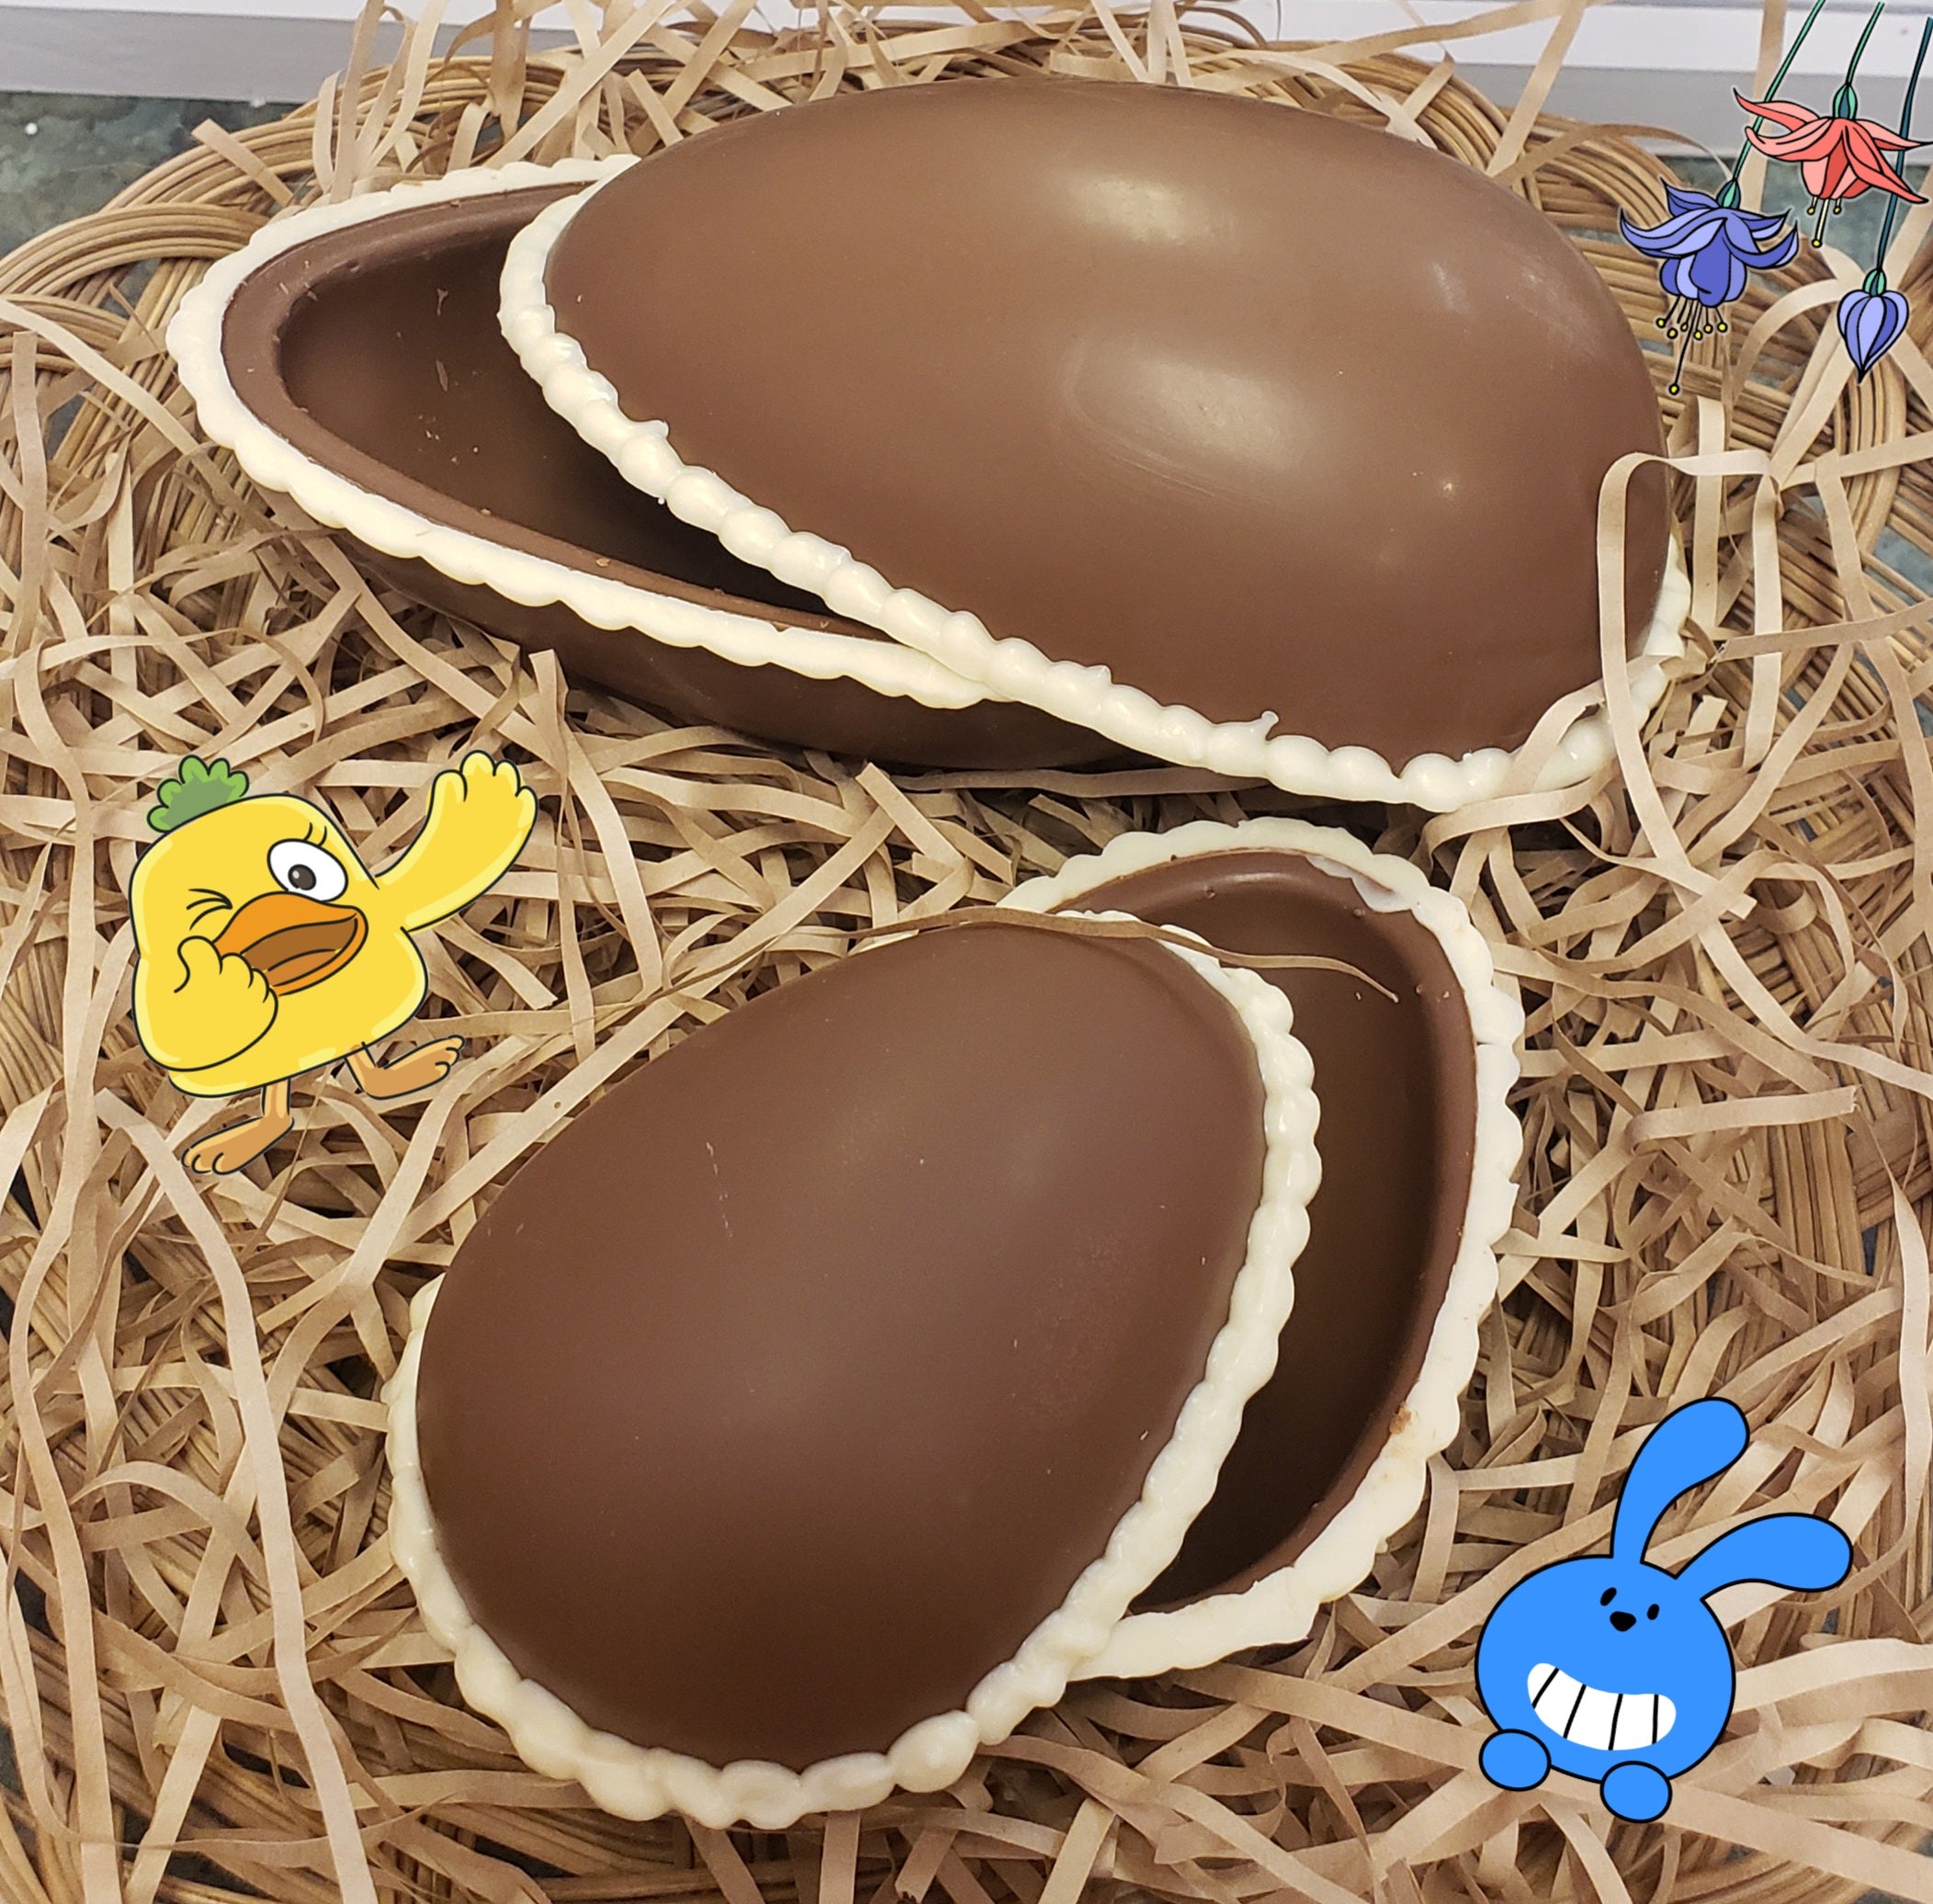 Hollow Chocolate Egg - Small